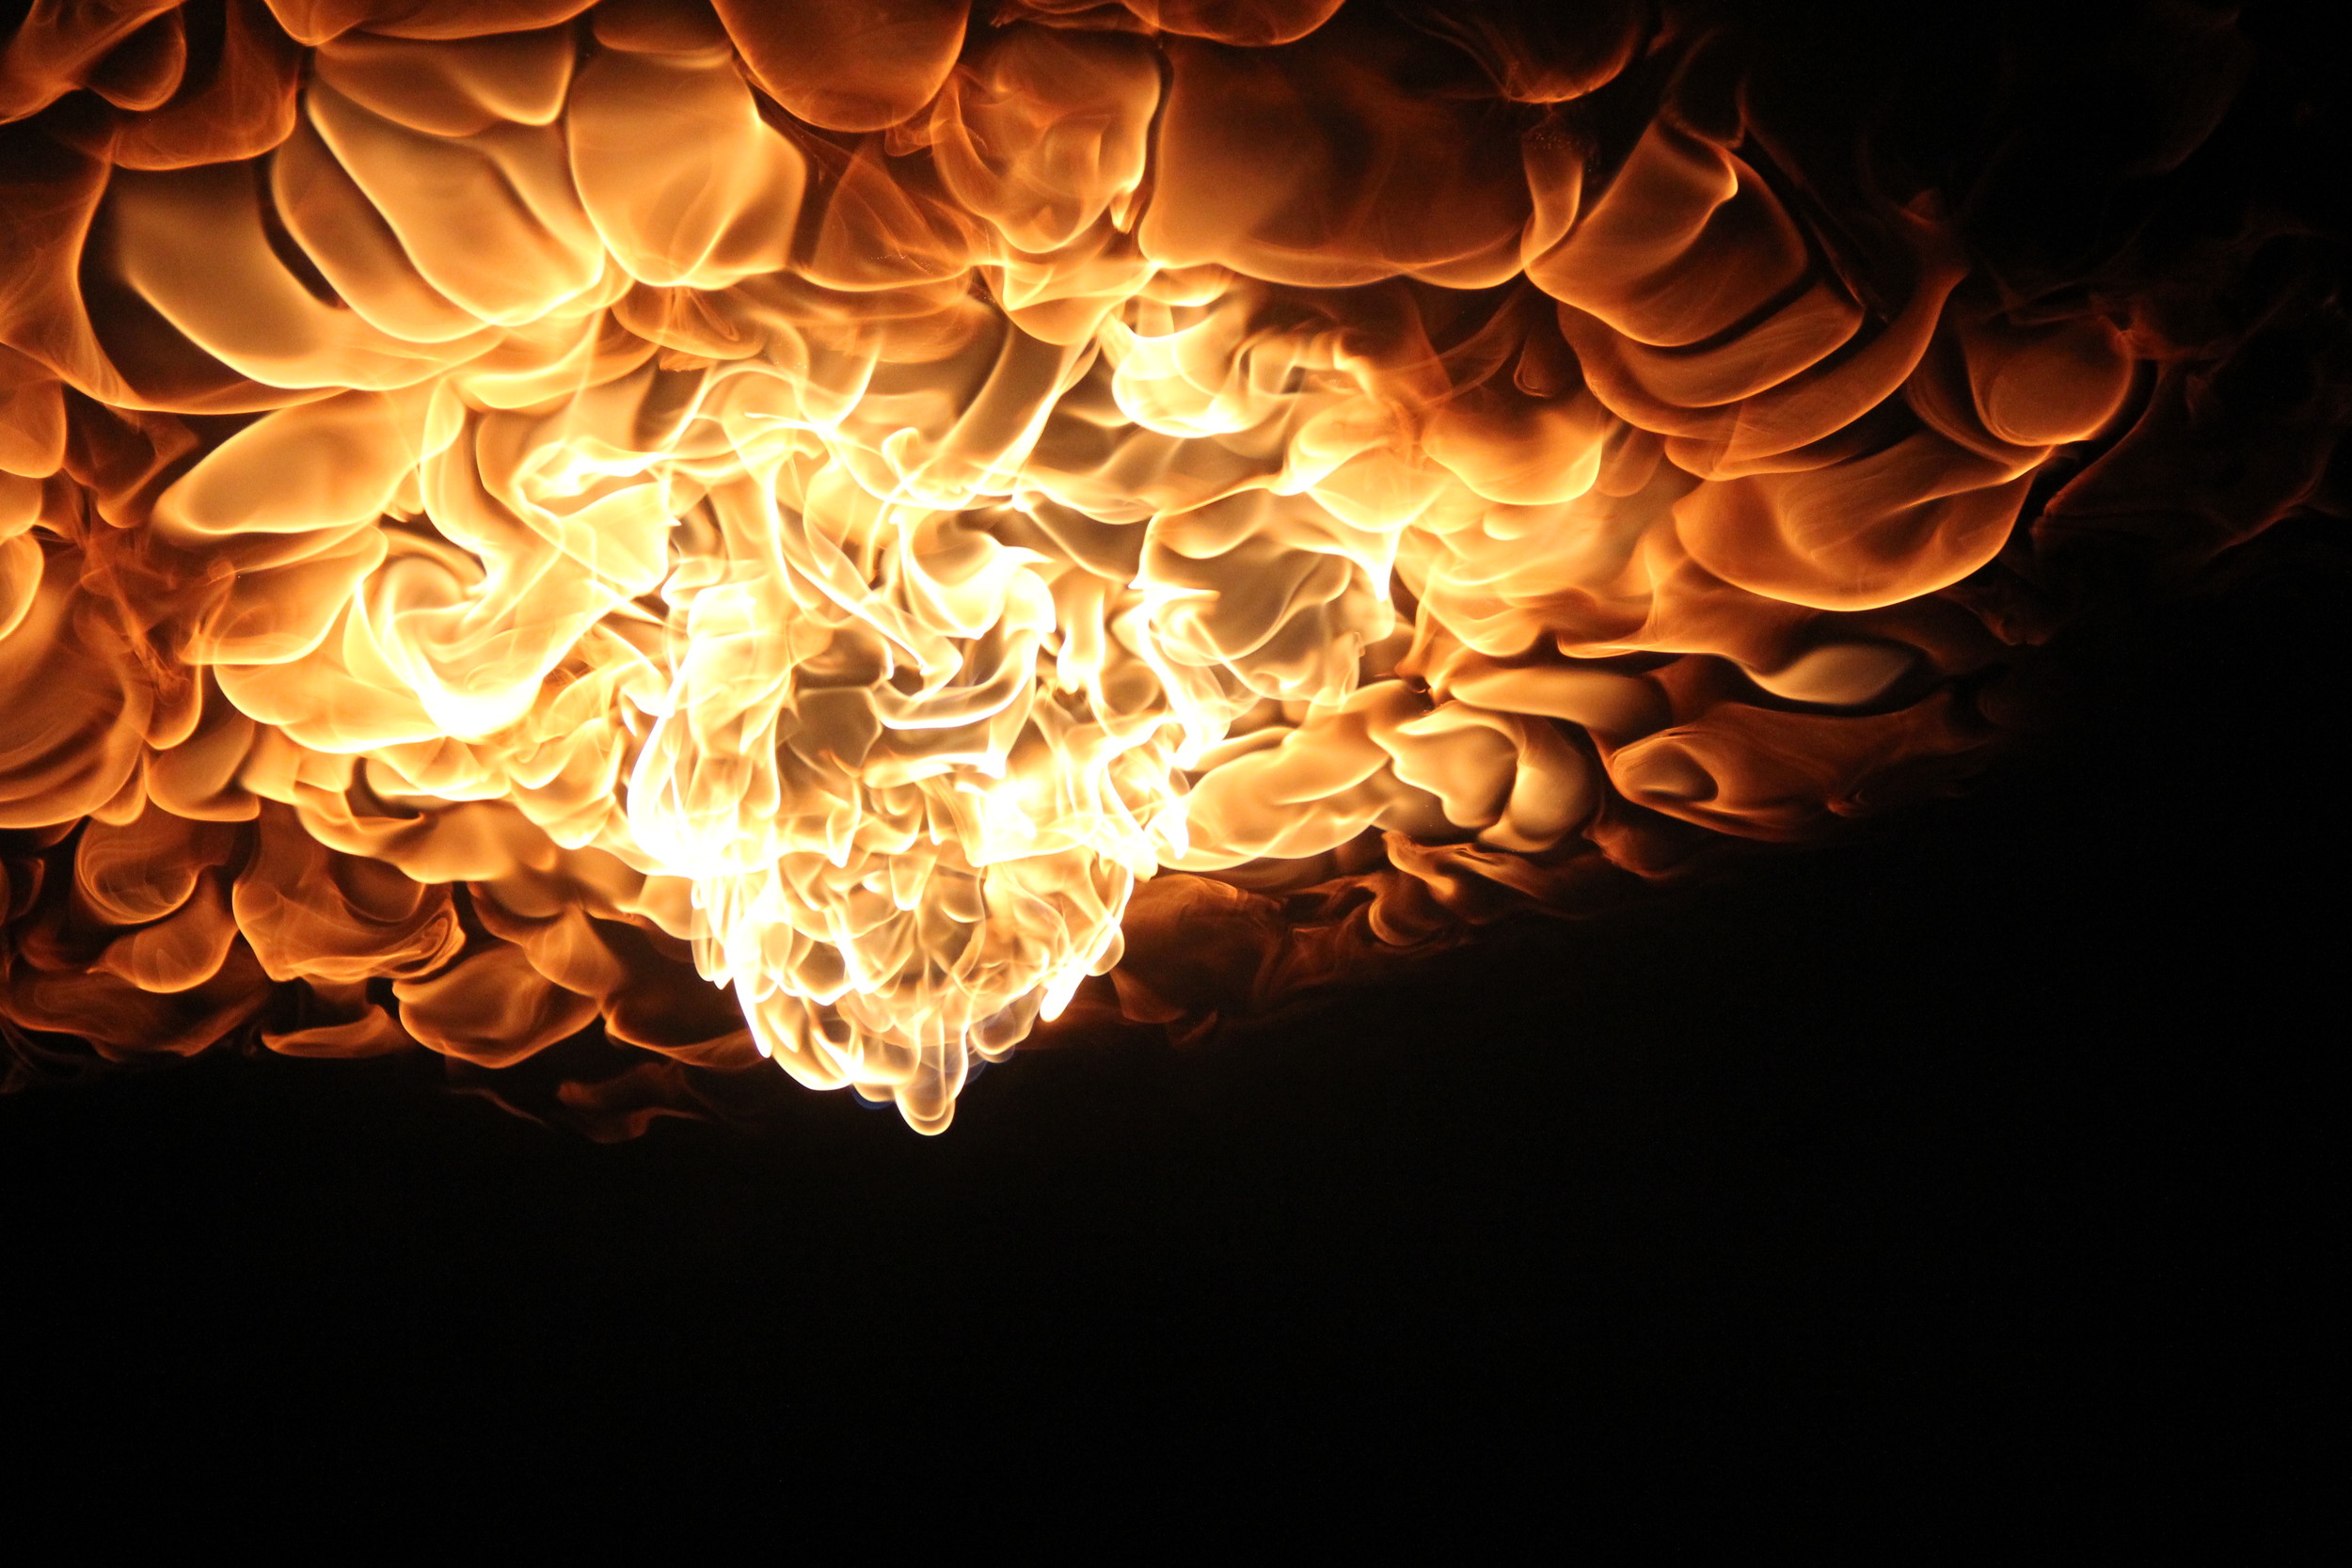 Inverted flames create an undulating effect not soon to be forgotten